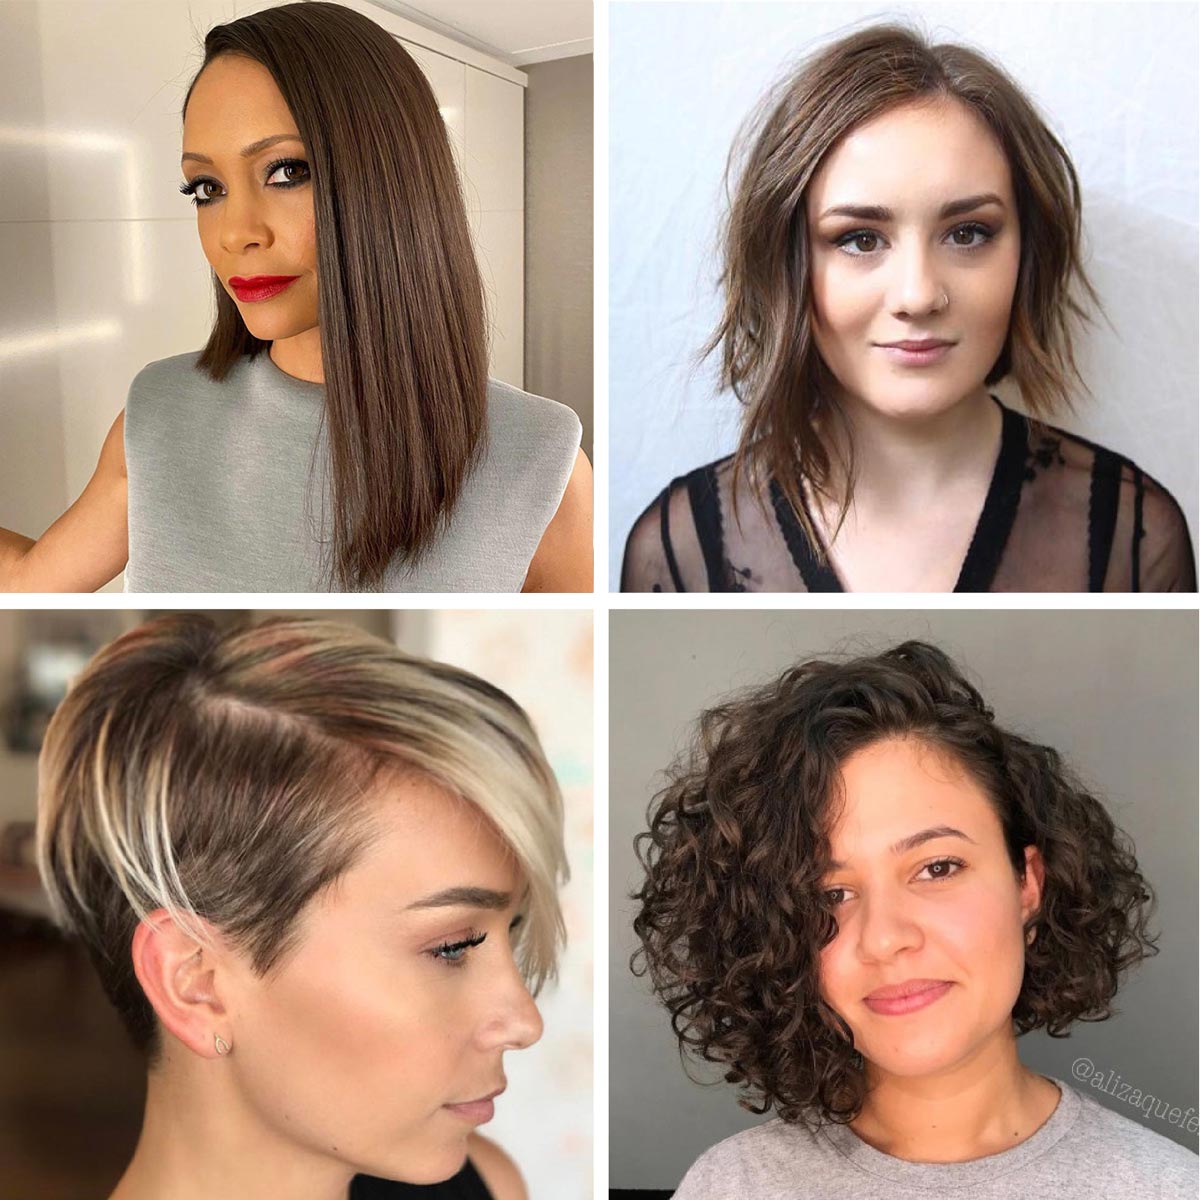 Asymmetric Haircuts - Edgy Styles You're Going to Love | Charles Ifergan  Salon | Chicago's Top Hair Salon